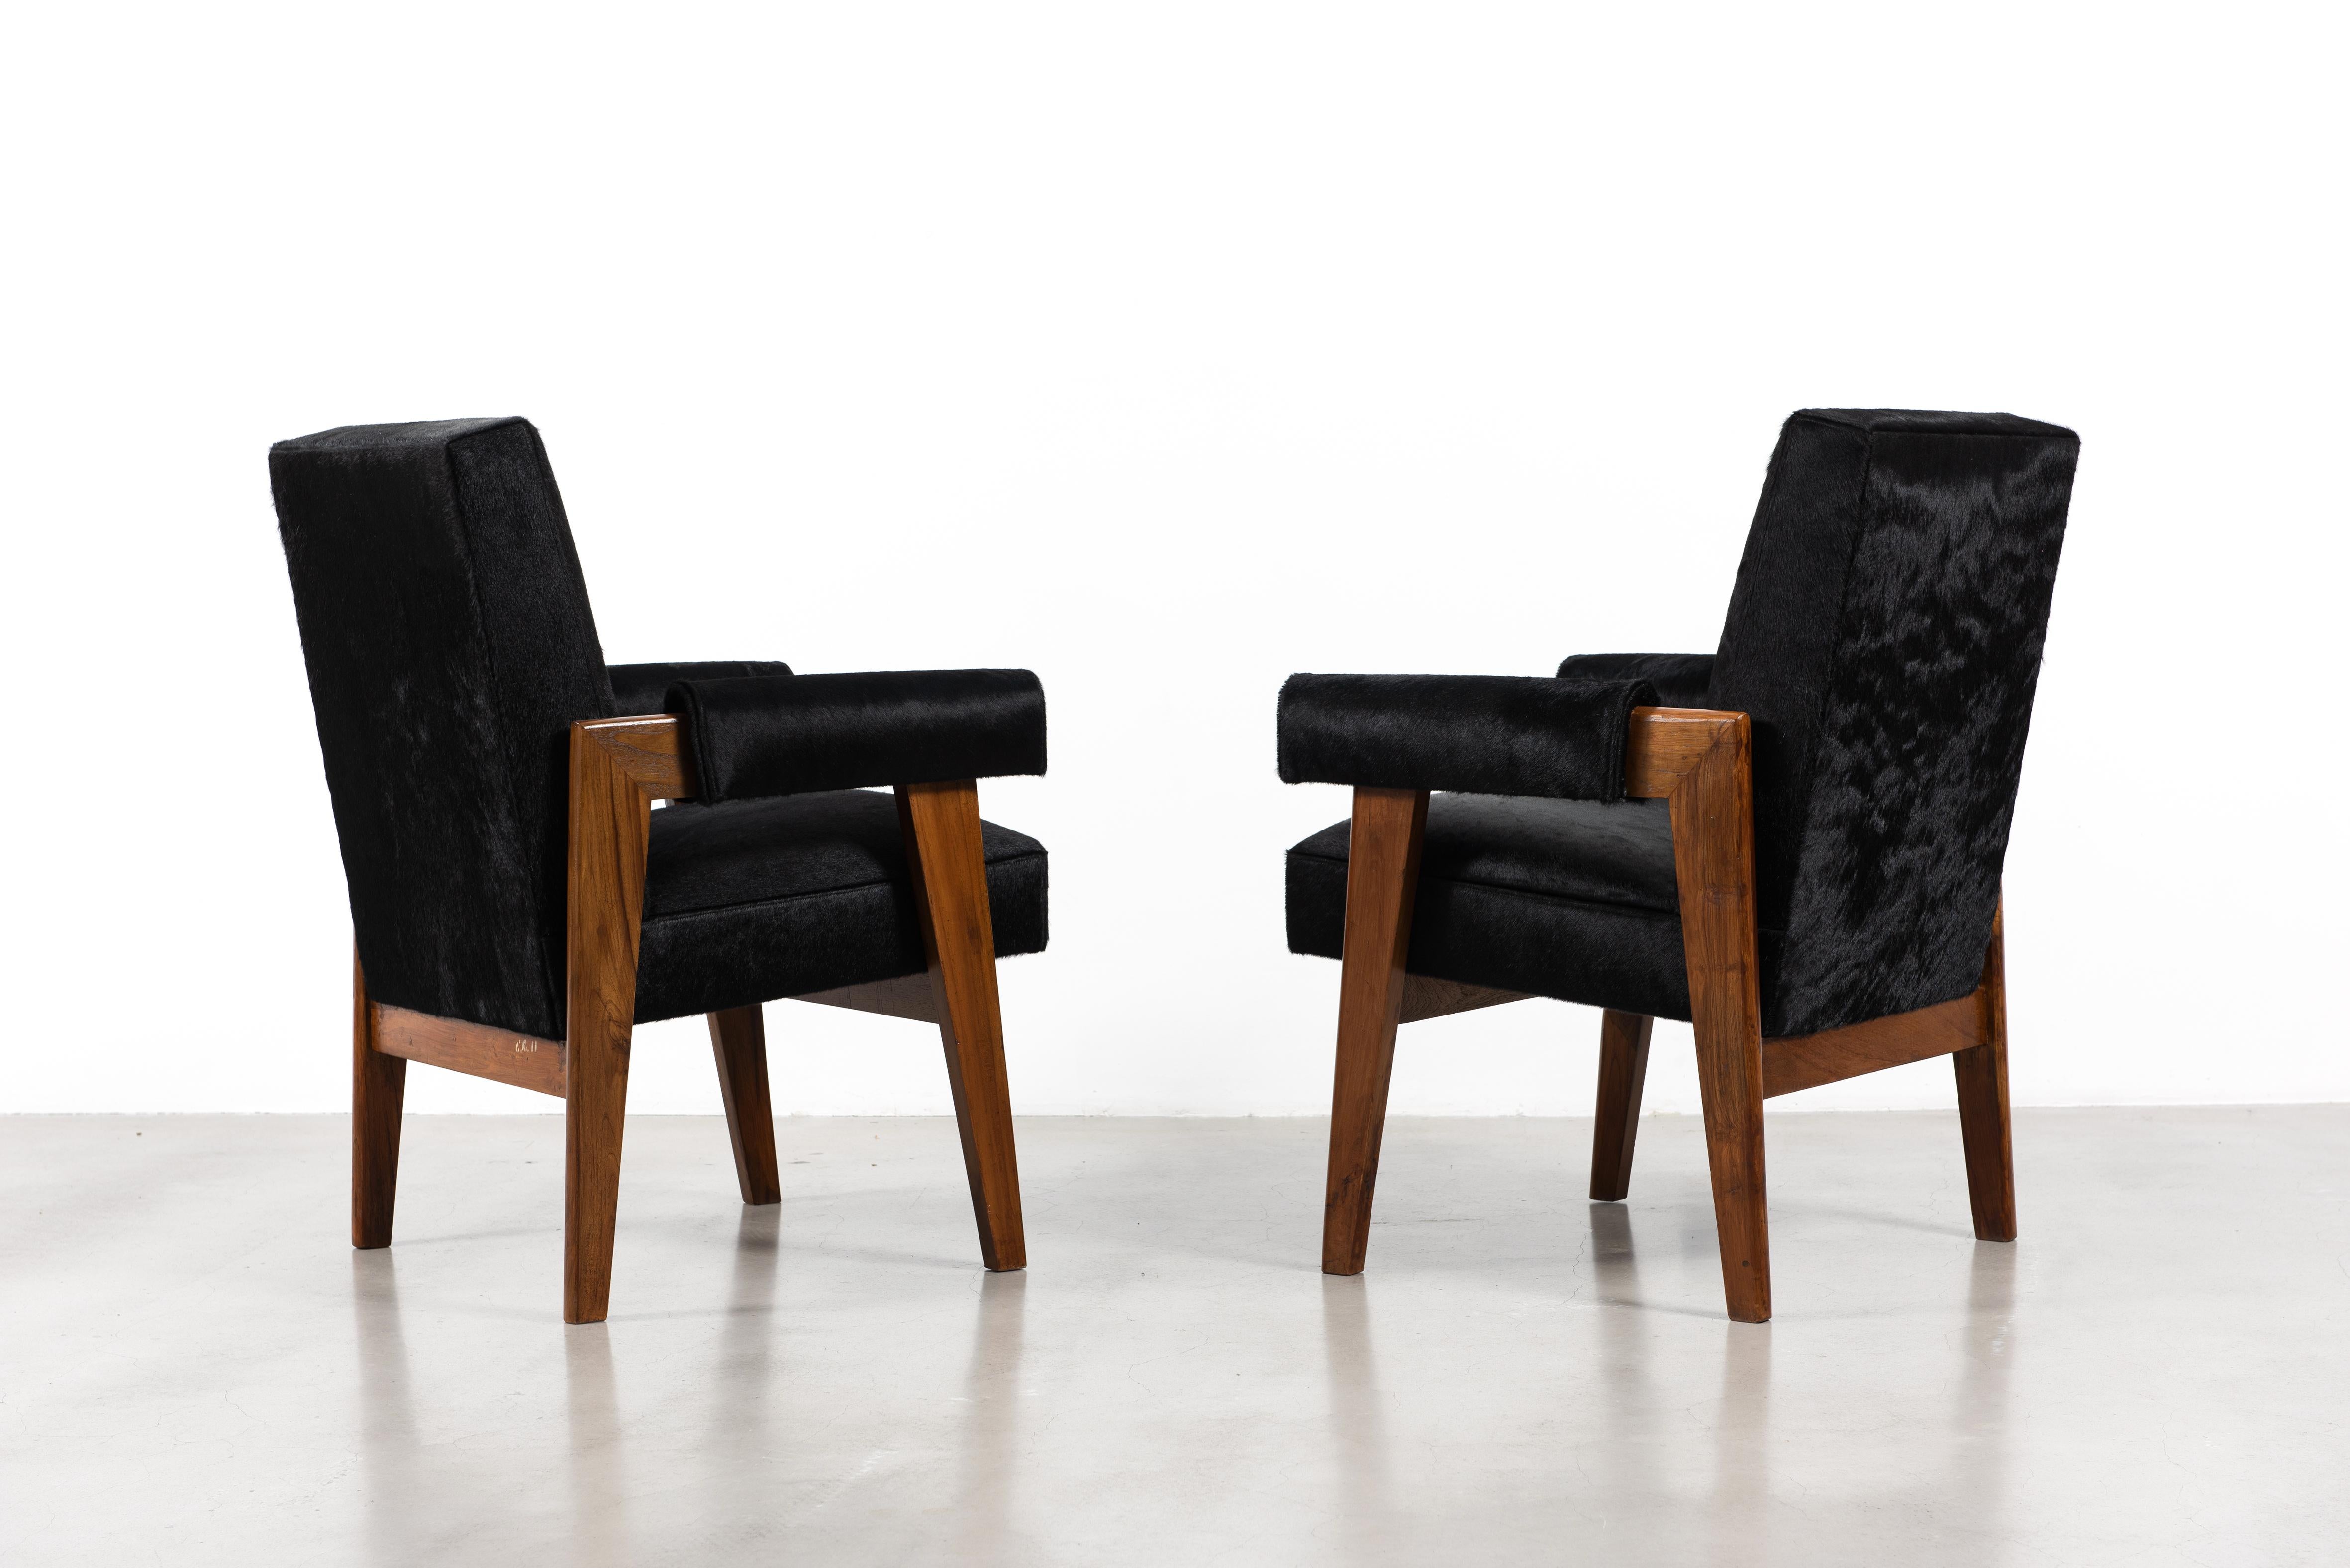 Pierre Jeanneret, Pair of Advocate armchairs, circa 1955-1956 In Good Condition For Sale In Paris, FR